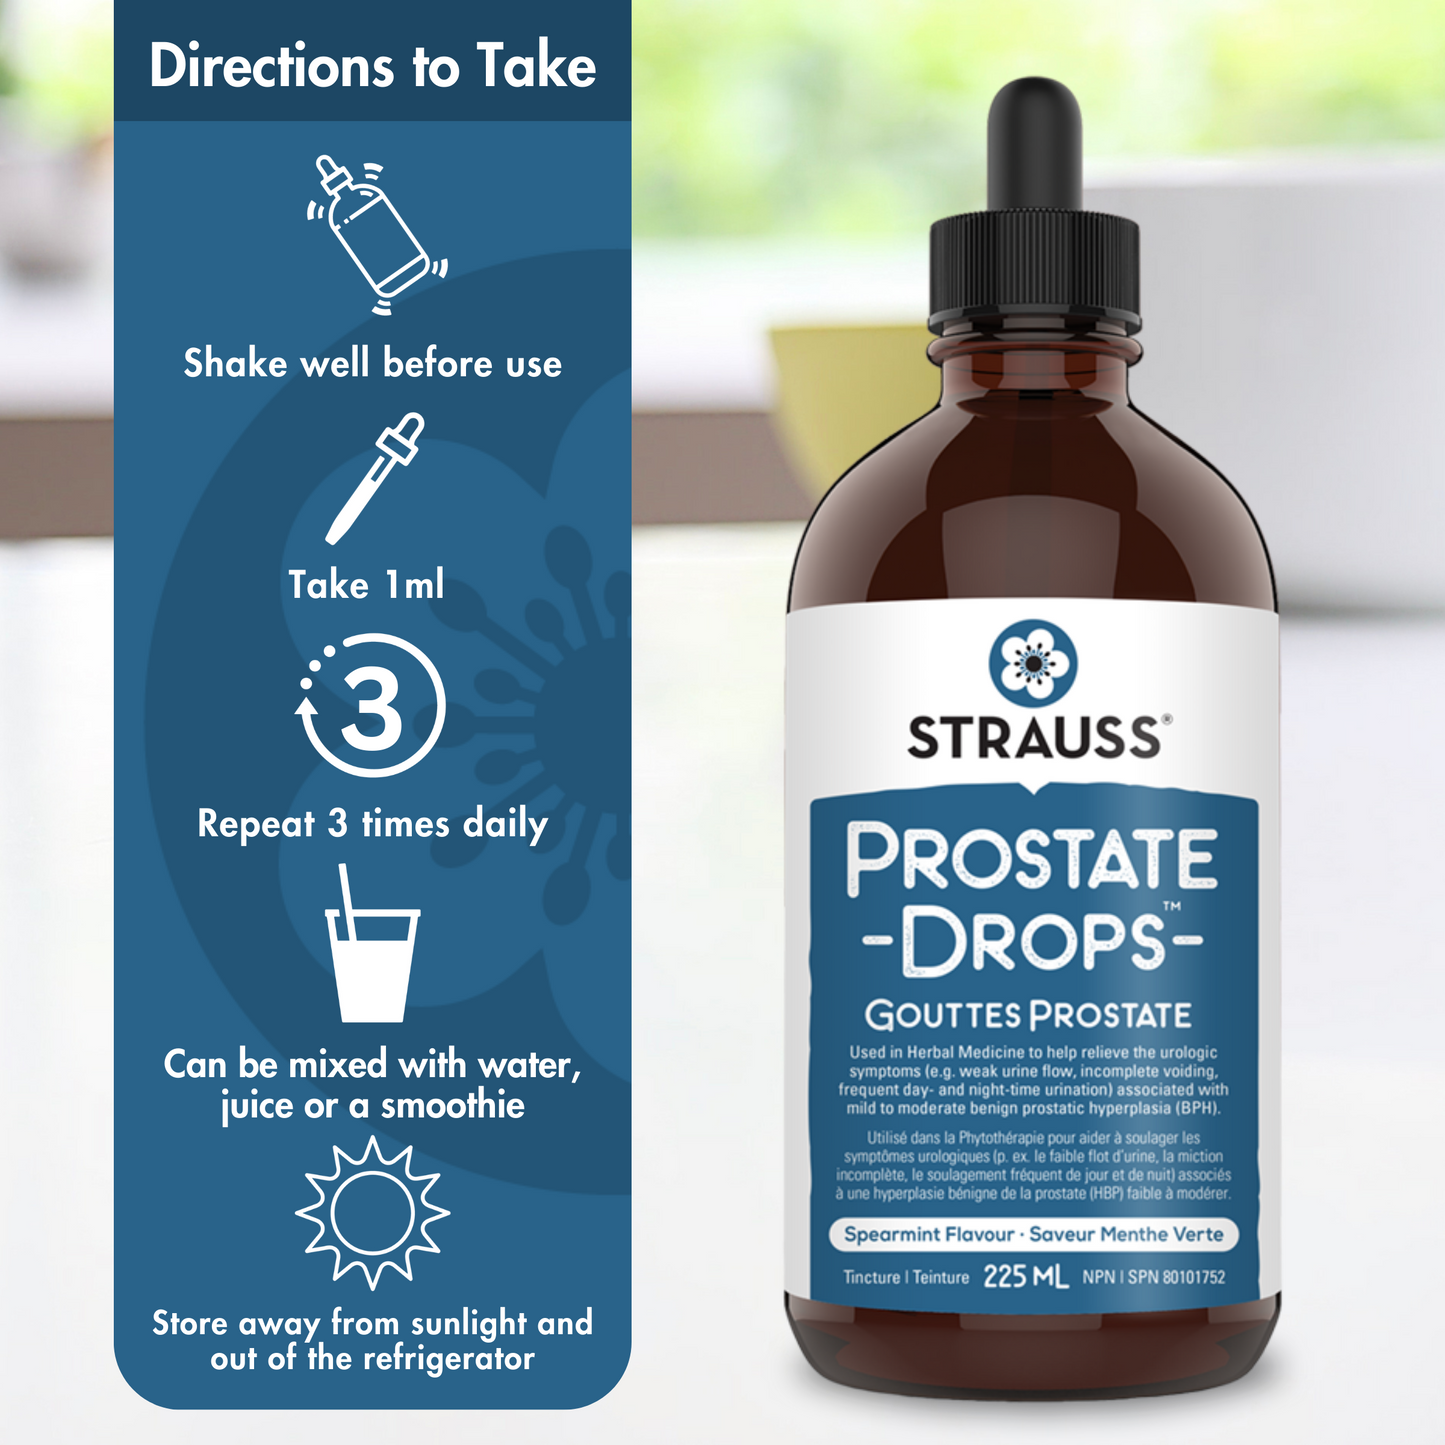 Prostate Drops™ - Prostate Support Supplement